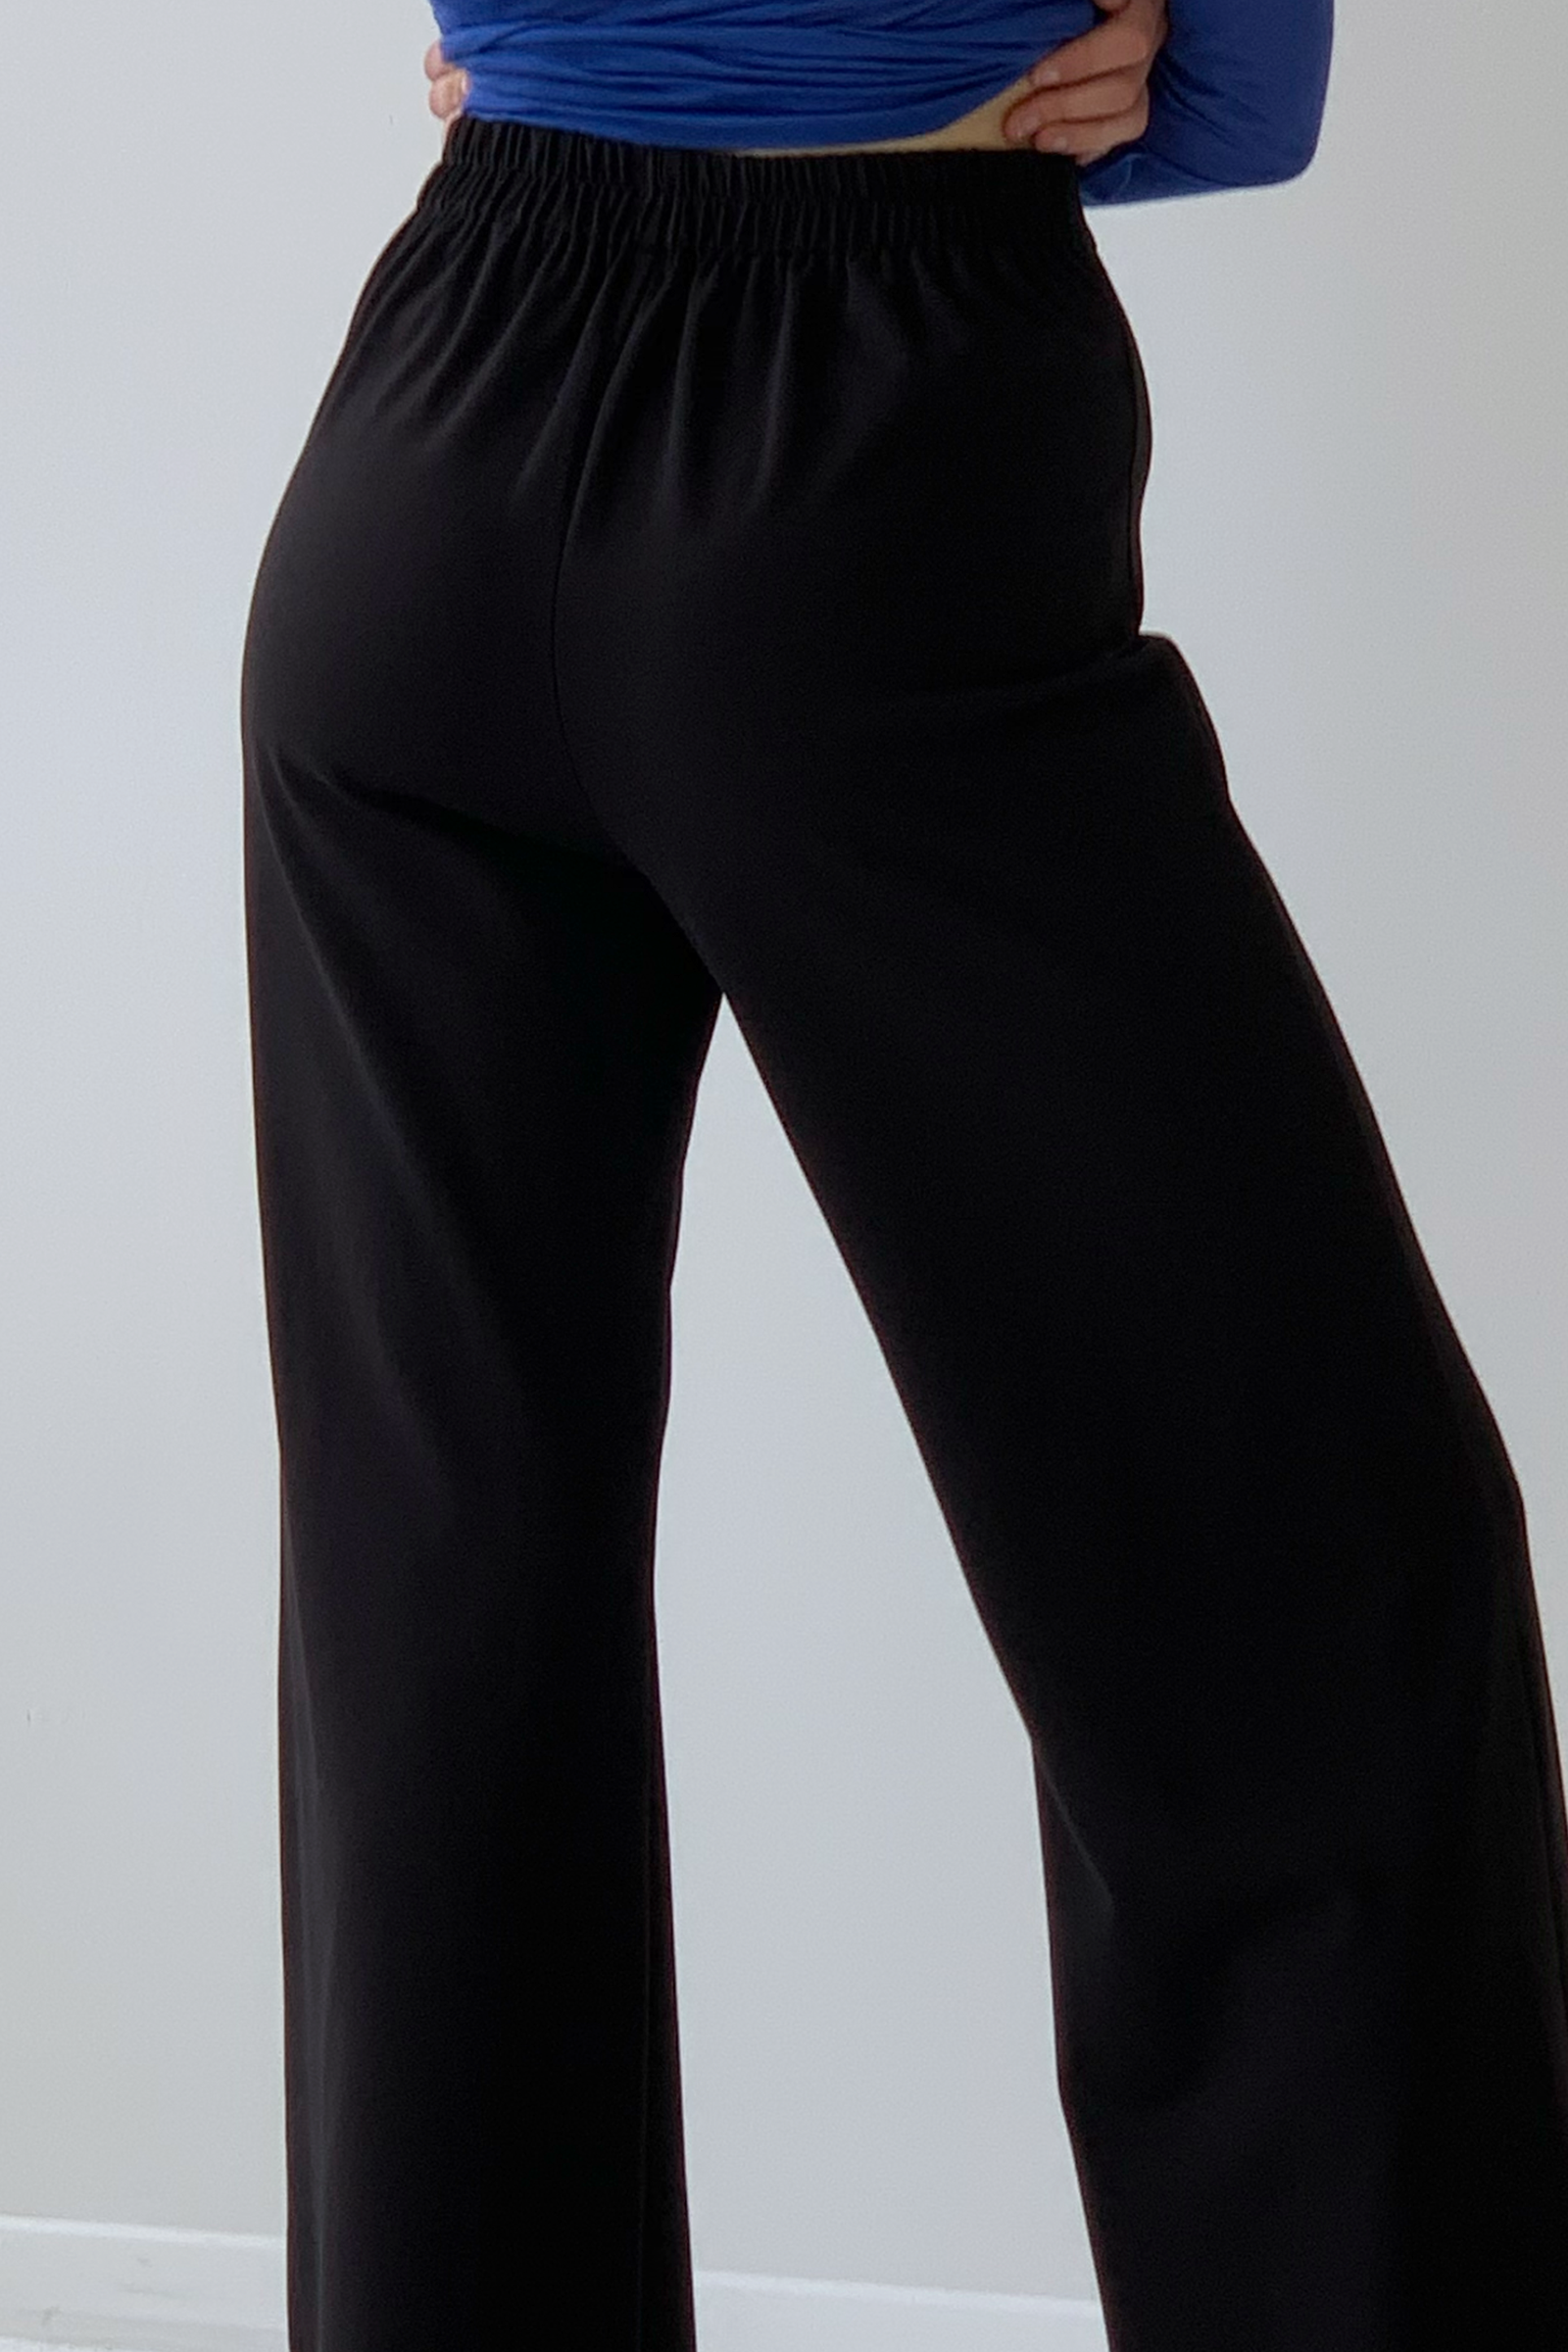 Band Pant in Black